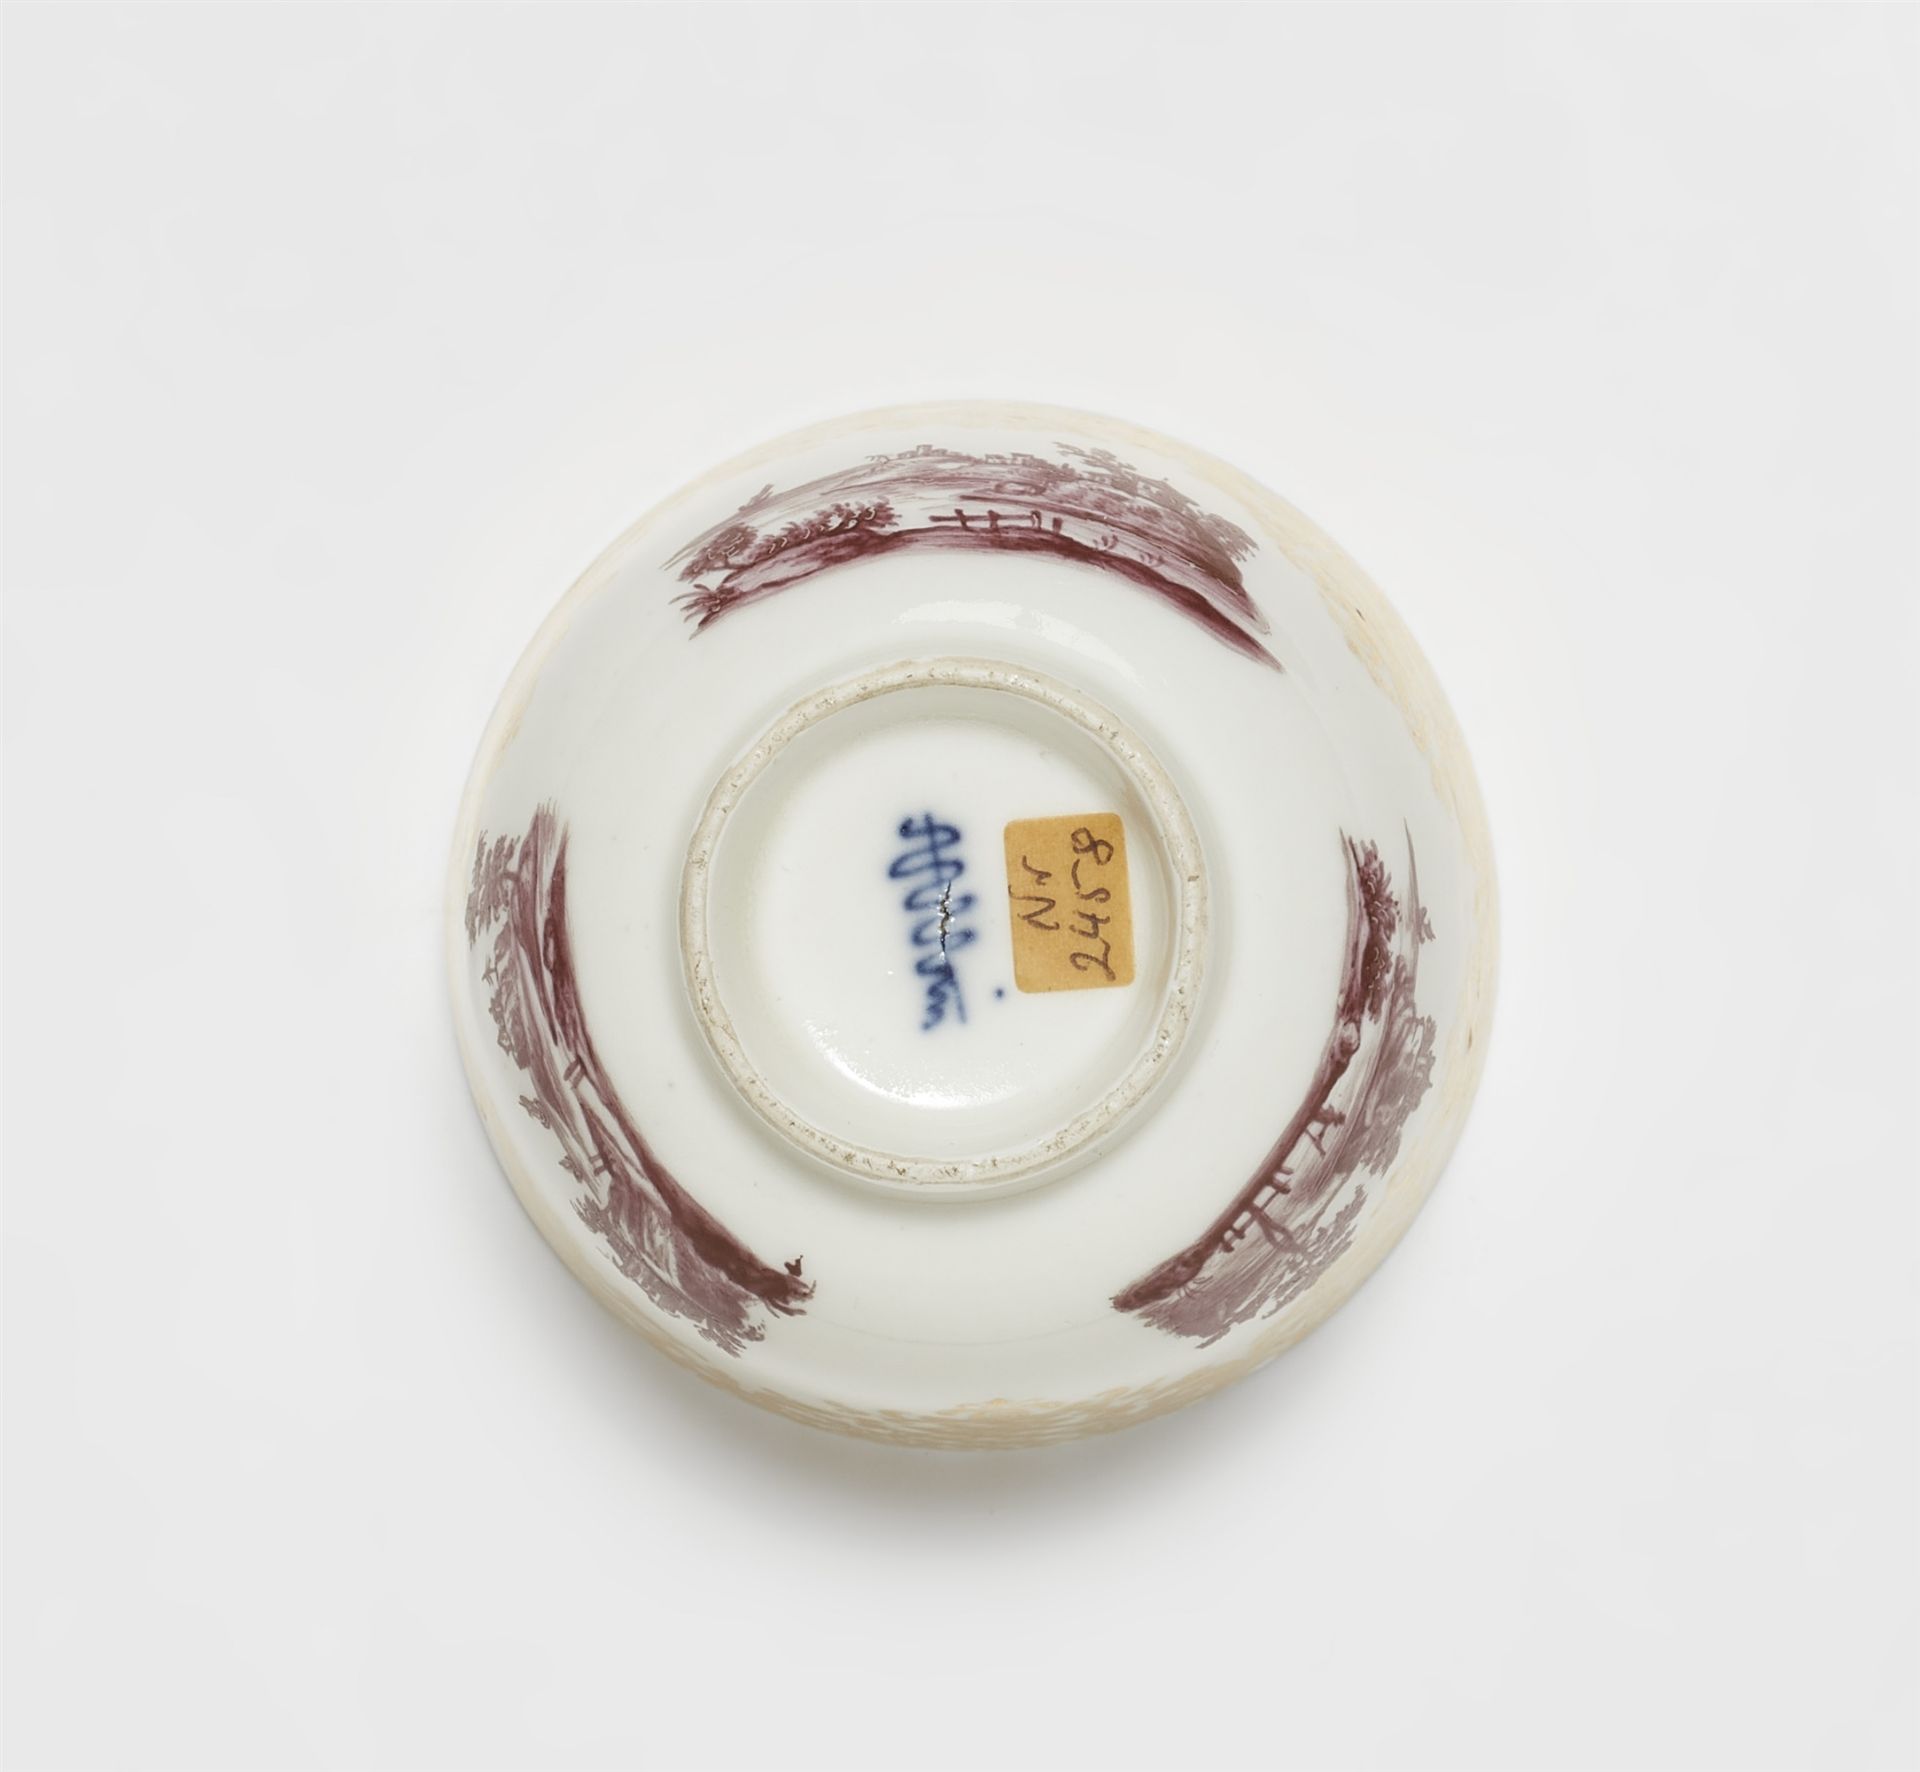 A Meissen porcelain dish and cover with landscape decor - Image 2 of 5